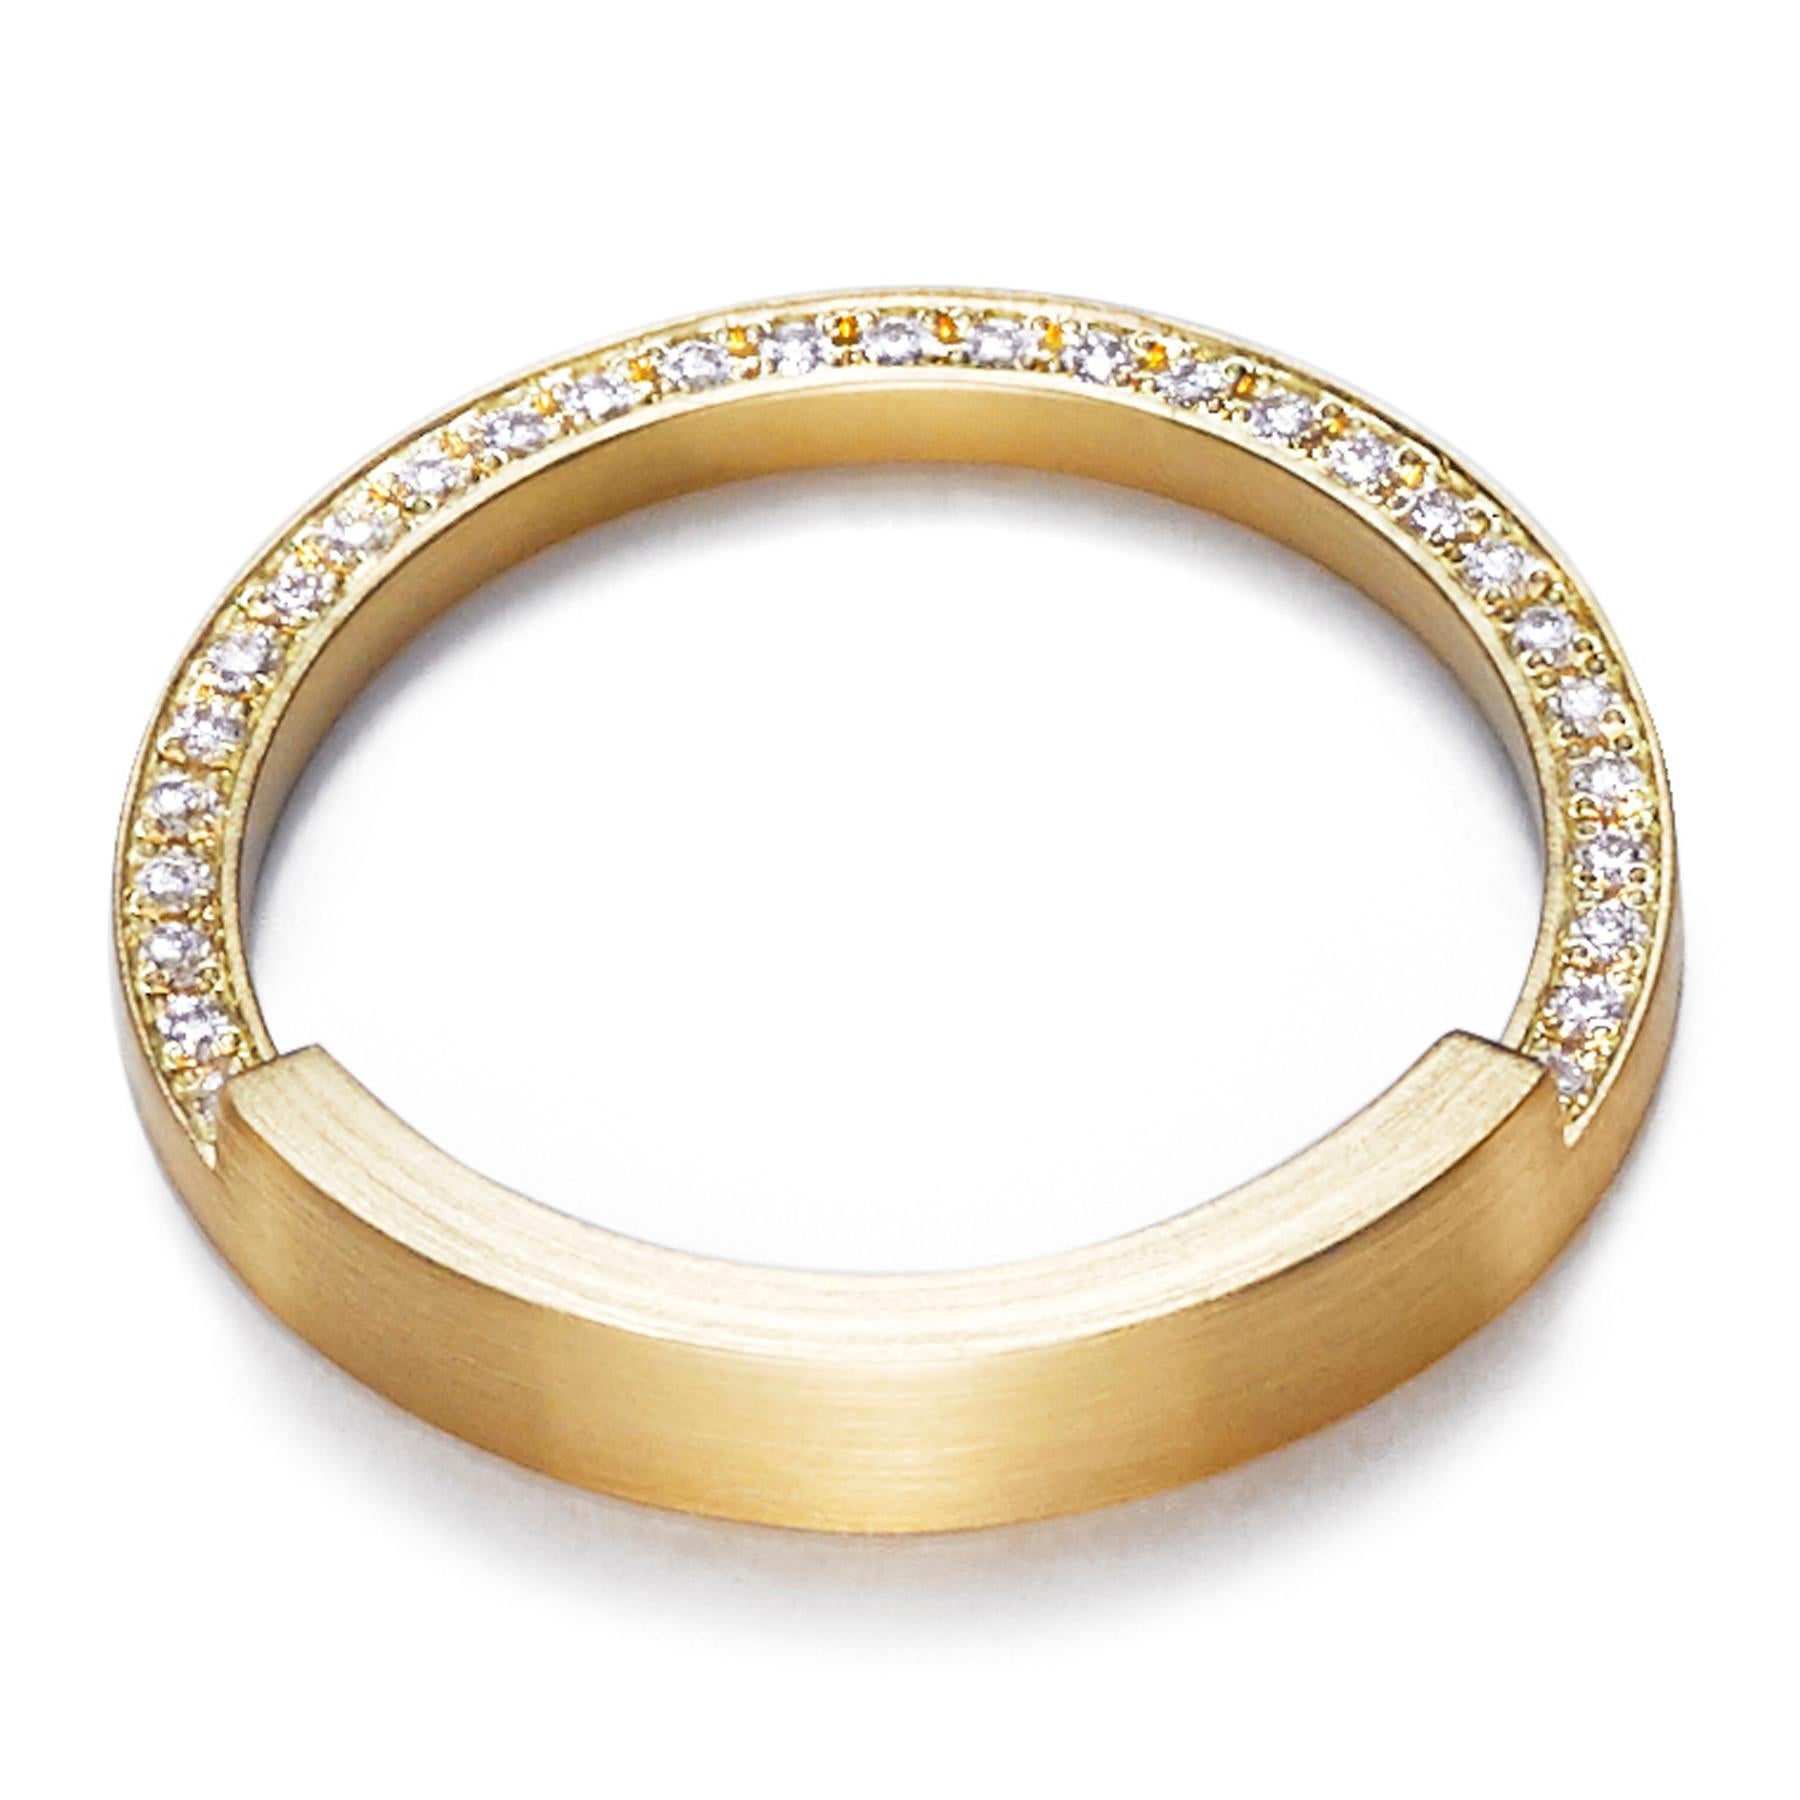 The 'Assemble 04' ring has a square edge band with two thirds of the band narrowed in half and filled with diamonds. Ideal for stacking* with other rings from the 'Assemble' range.

Diamond: 1mm (amount varies depending on ring size)
Band width: